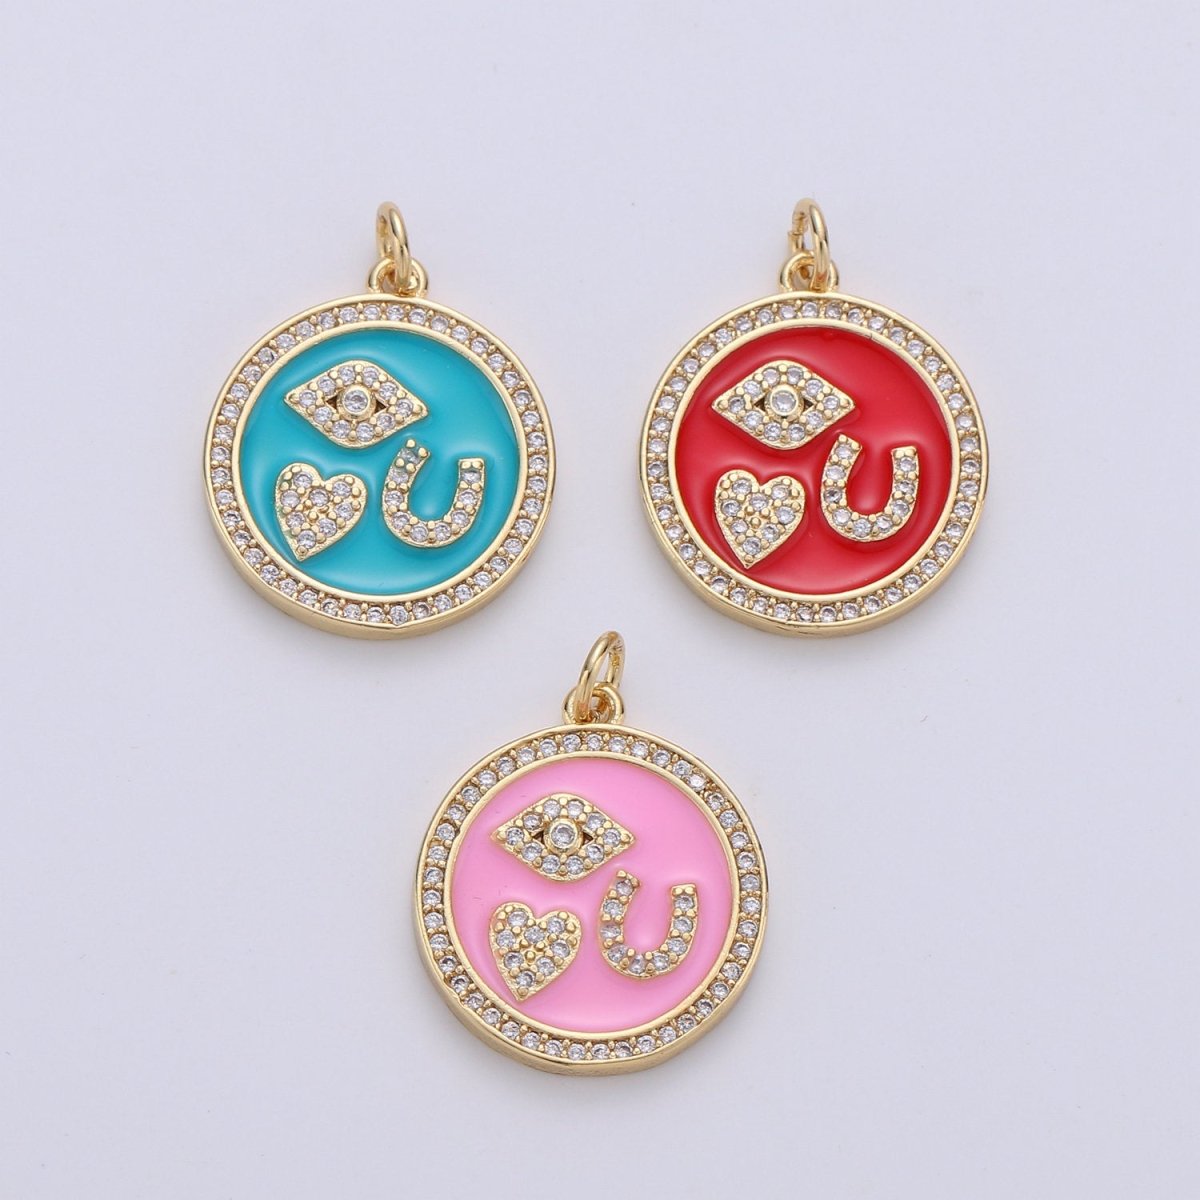 24K Gold Filled Dainty Love You Enamel Charm in Teal, Pink or Red with Micro Pave Cubic Zirconia CZ Stone for Necklace or Bracelet, C-879 - DLUXCA